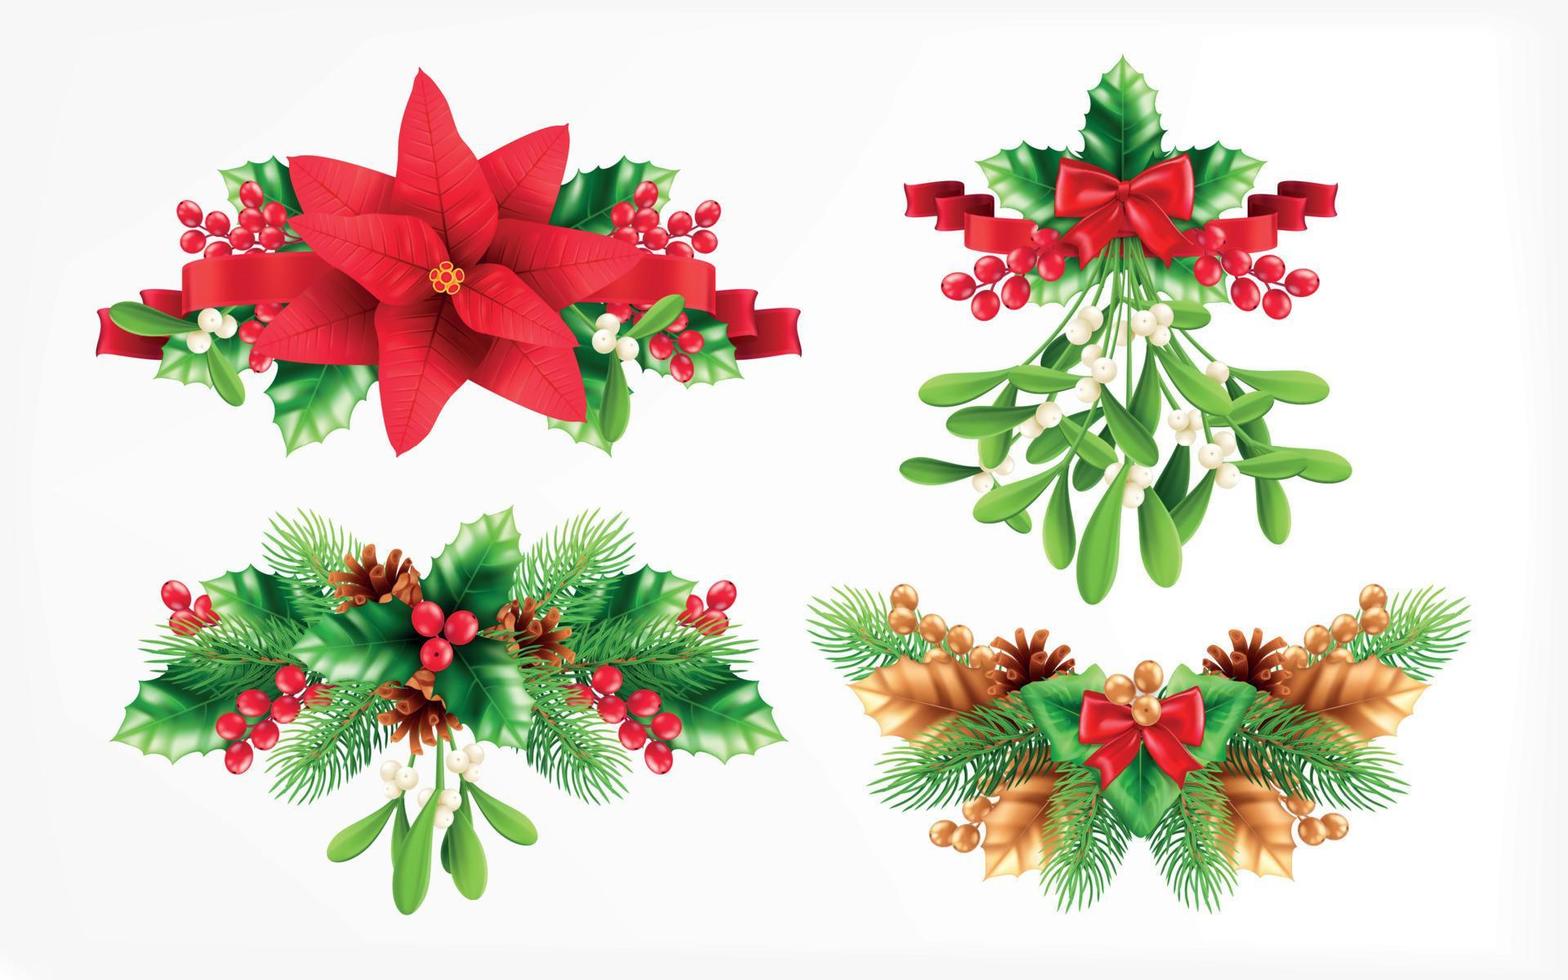 Christmas Decorations Compositions Set vector